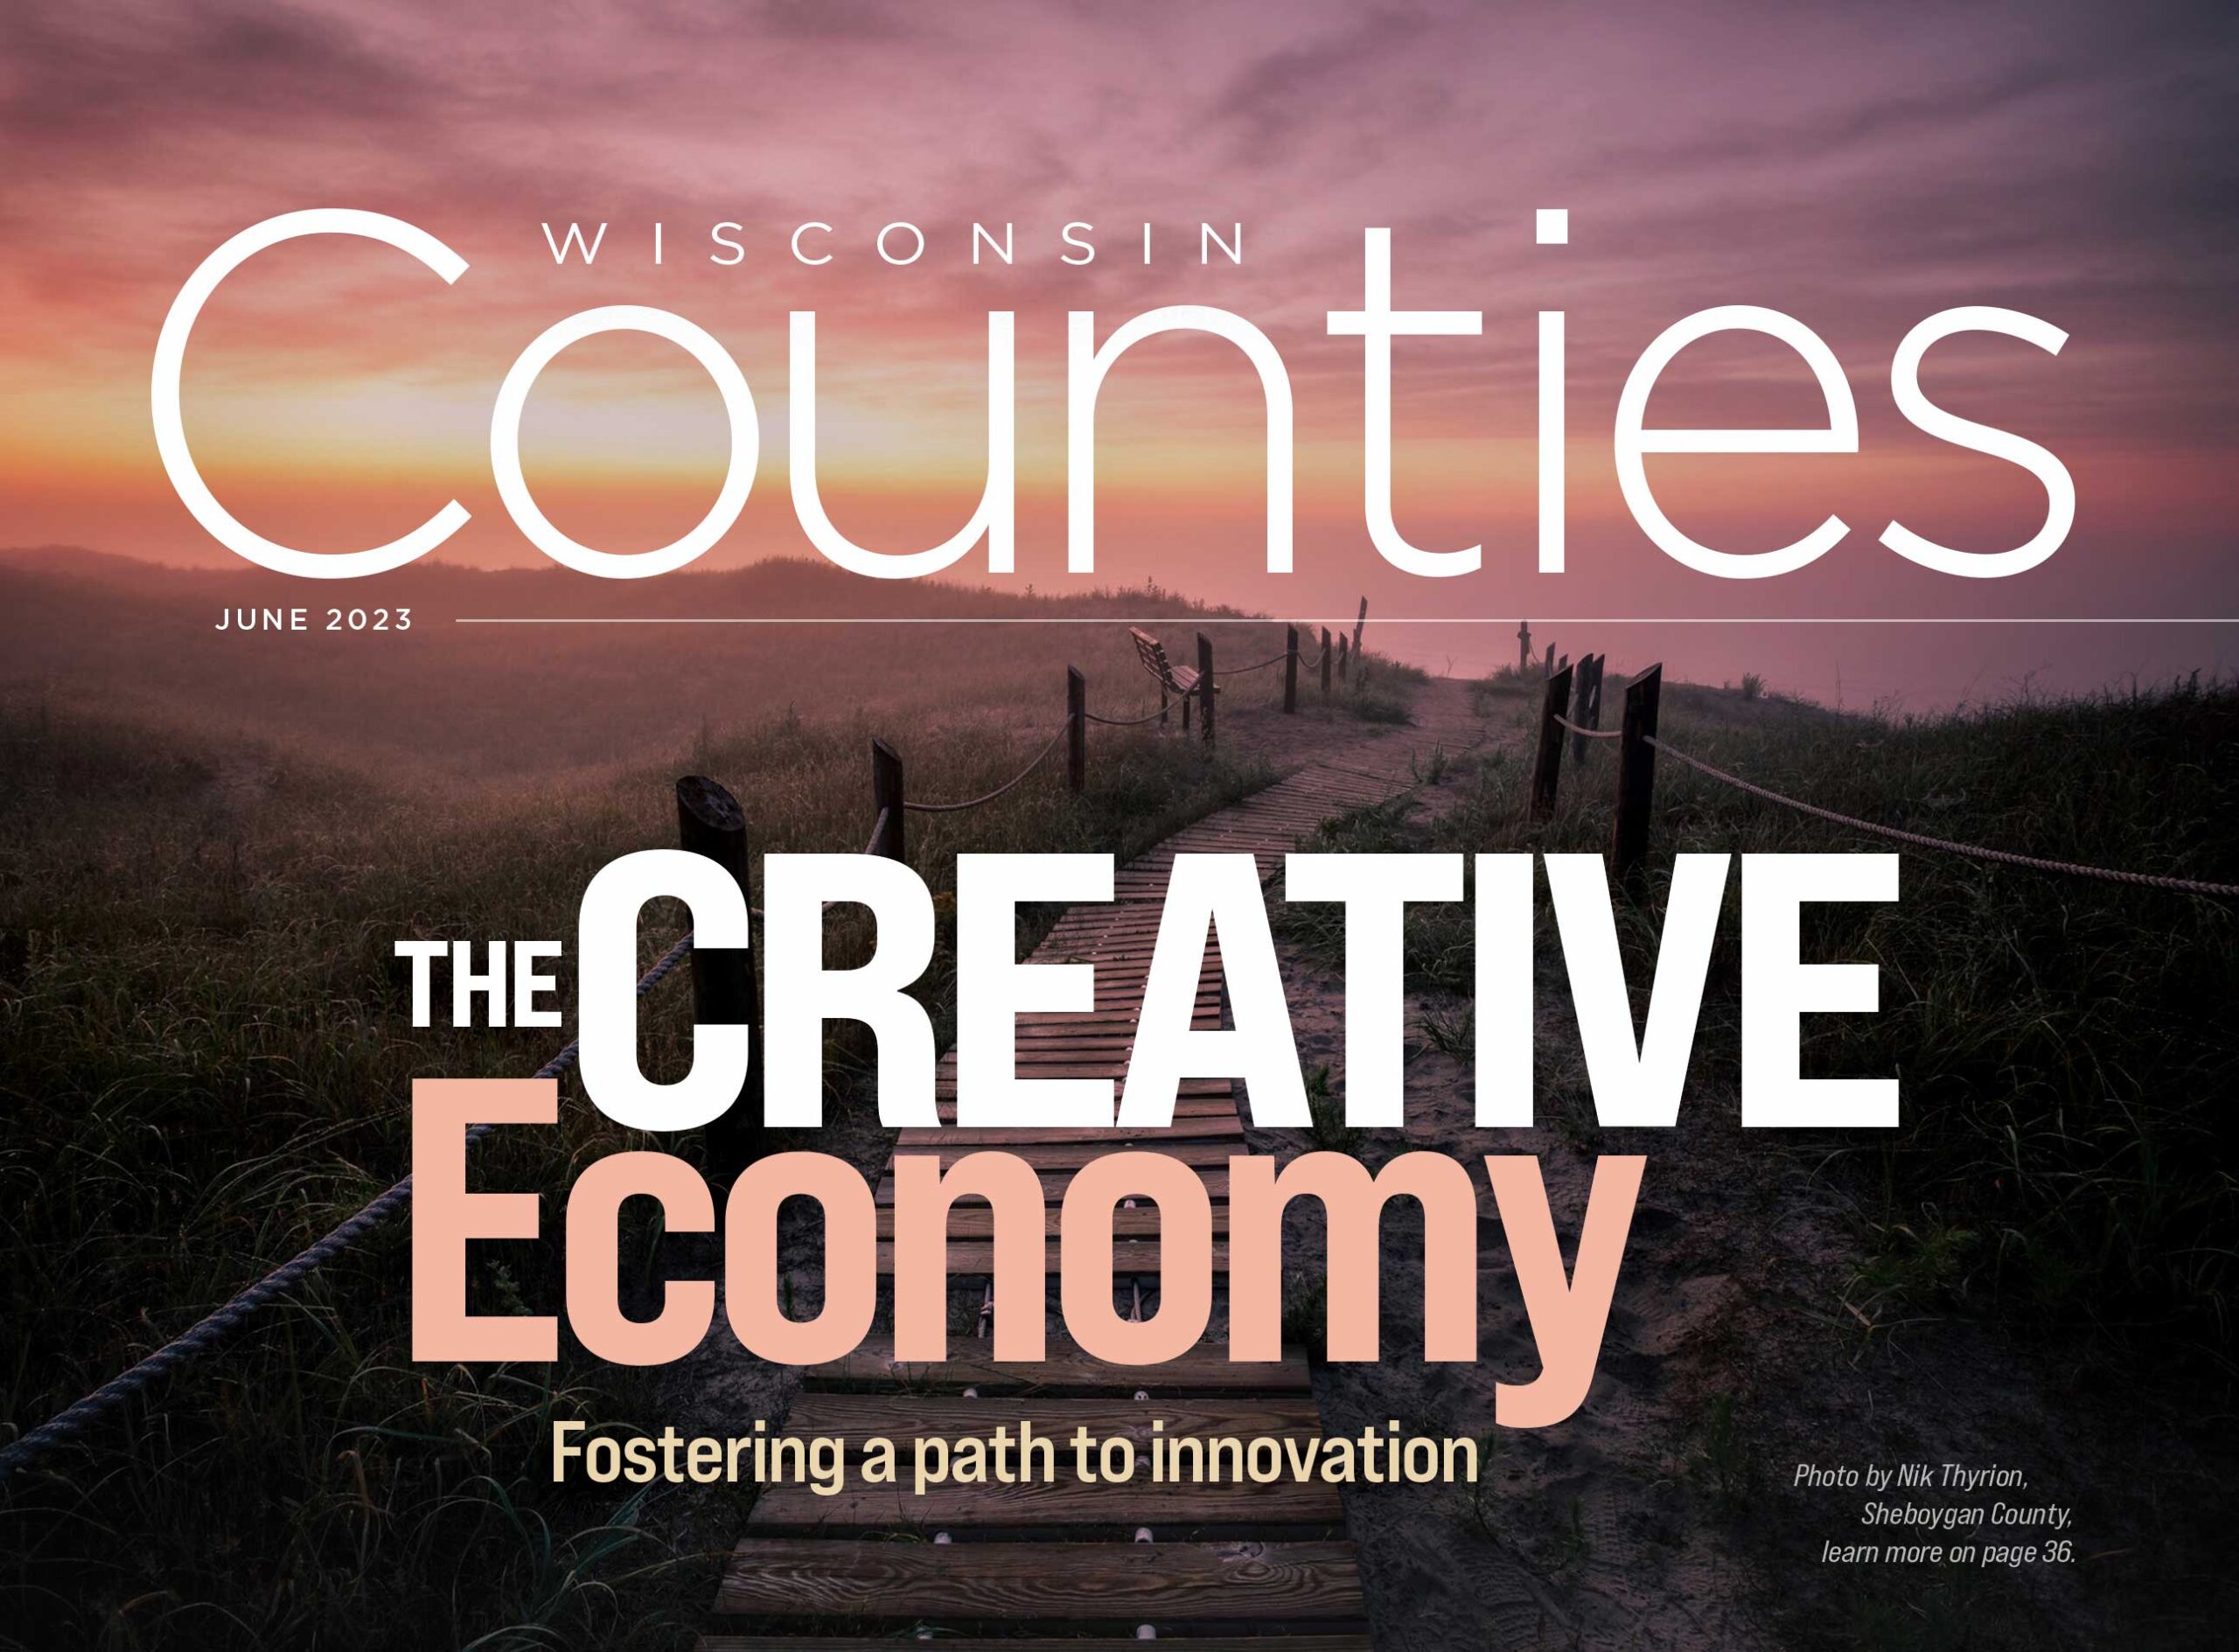 The Creative Economy: Fostering a Path to Innovation